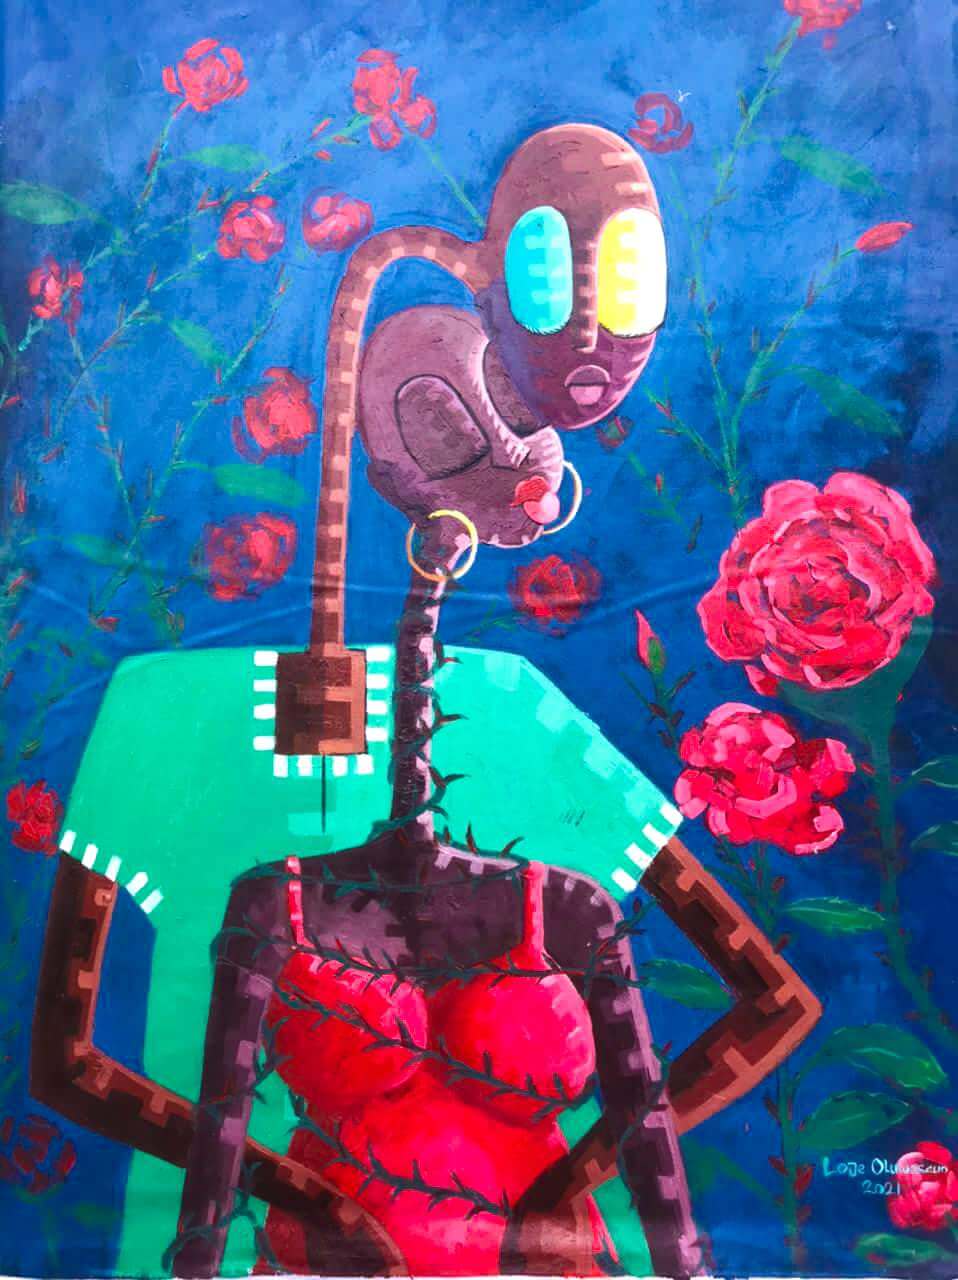 Thorns in our lives - Loje Seun - African visual artist, African art